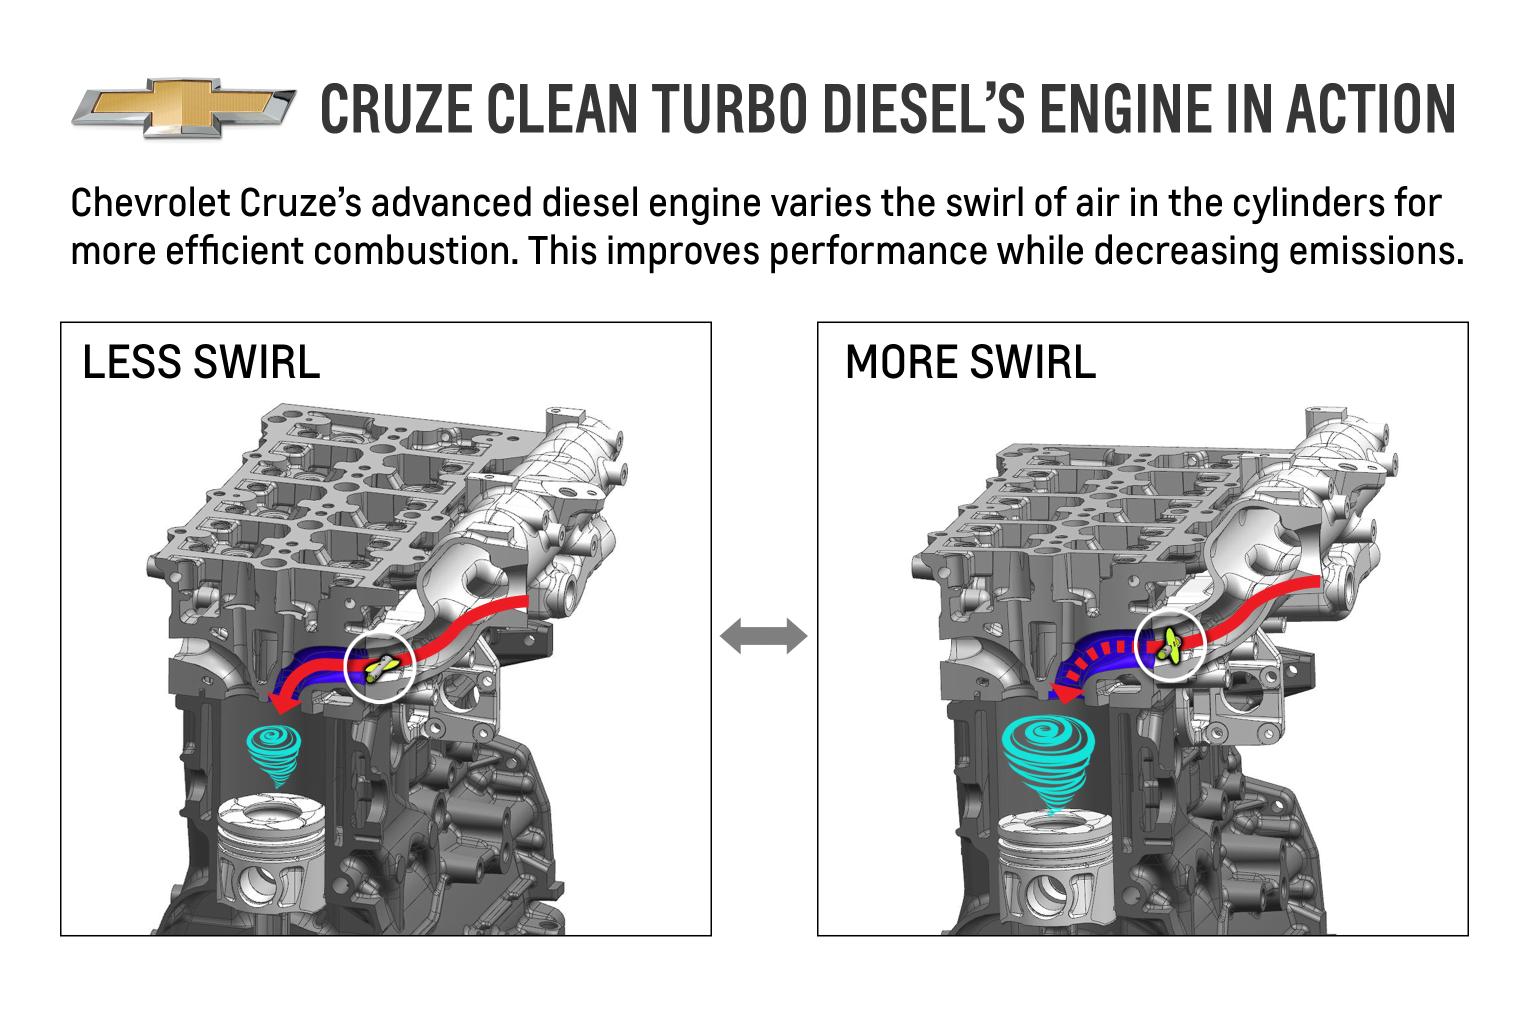 The all-new 2014 Chevrolet Cruze Clean Turbo Diesel's advanced 2.0L engine uses a variable-swirl intake system to create a “perfect storm” of air and fuel that helps enhance performance while reducing emissions.